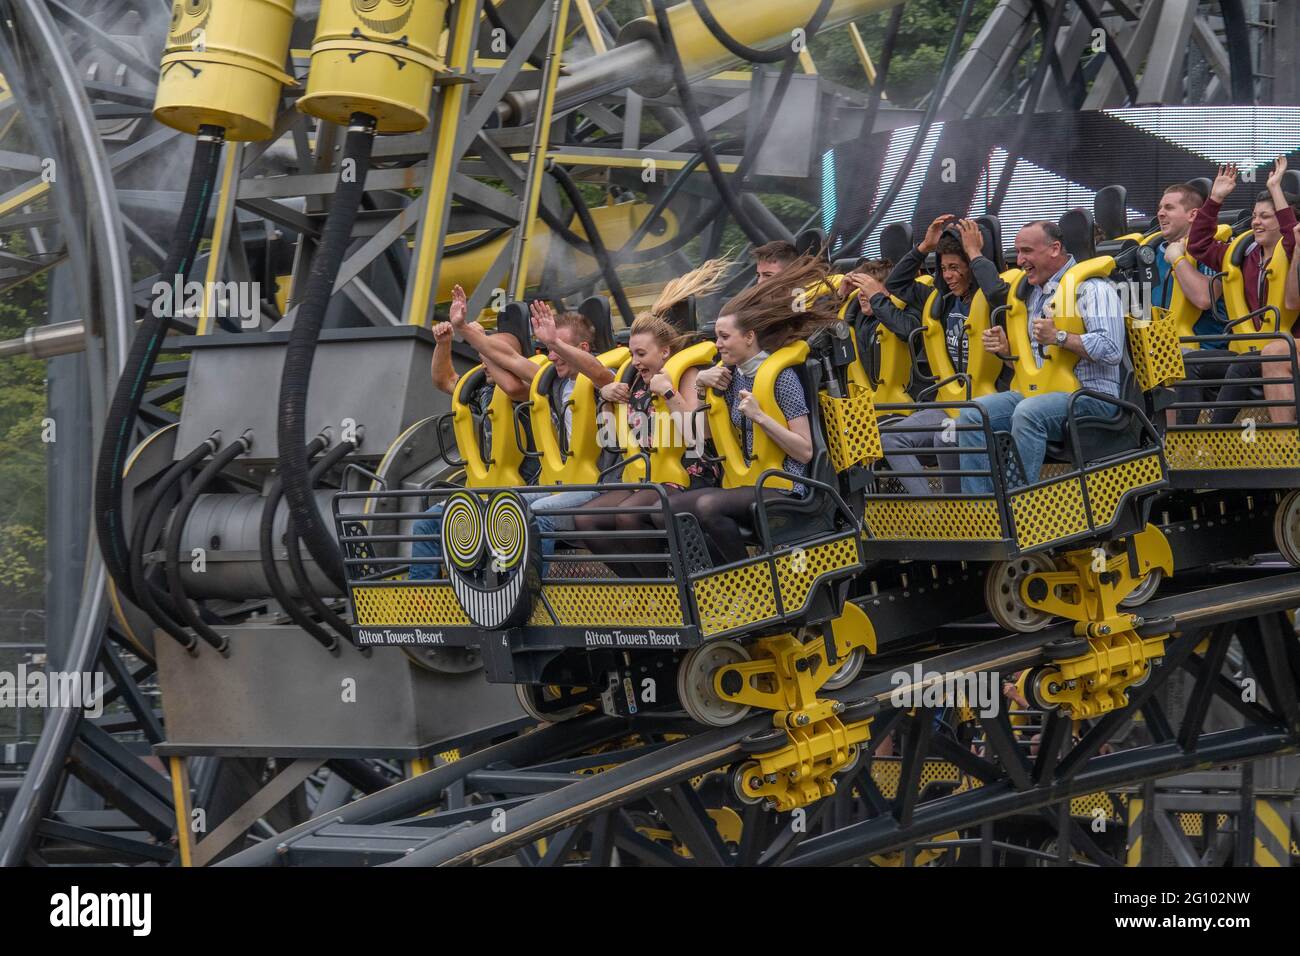 The Smiler World Record Breaking 14 Inversion Rollercoaster at Alton Towers England Stock Photo